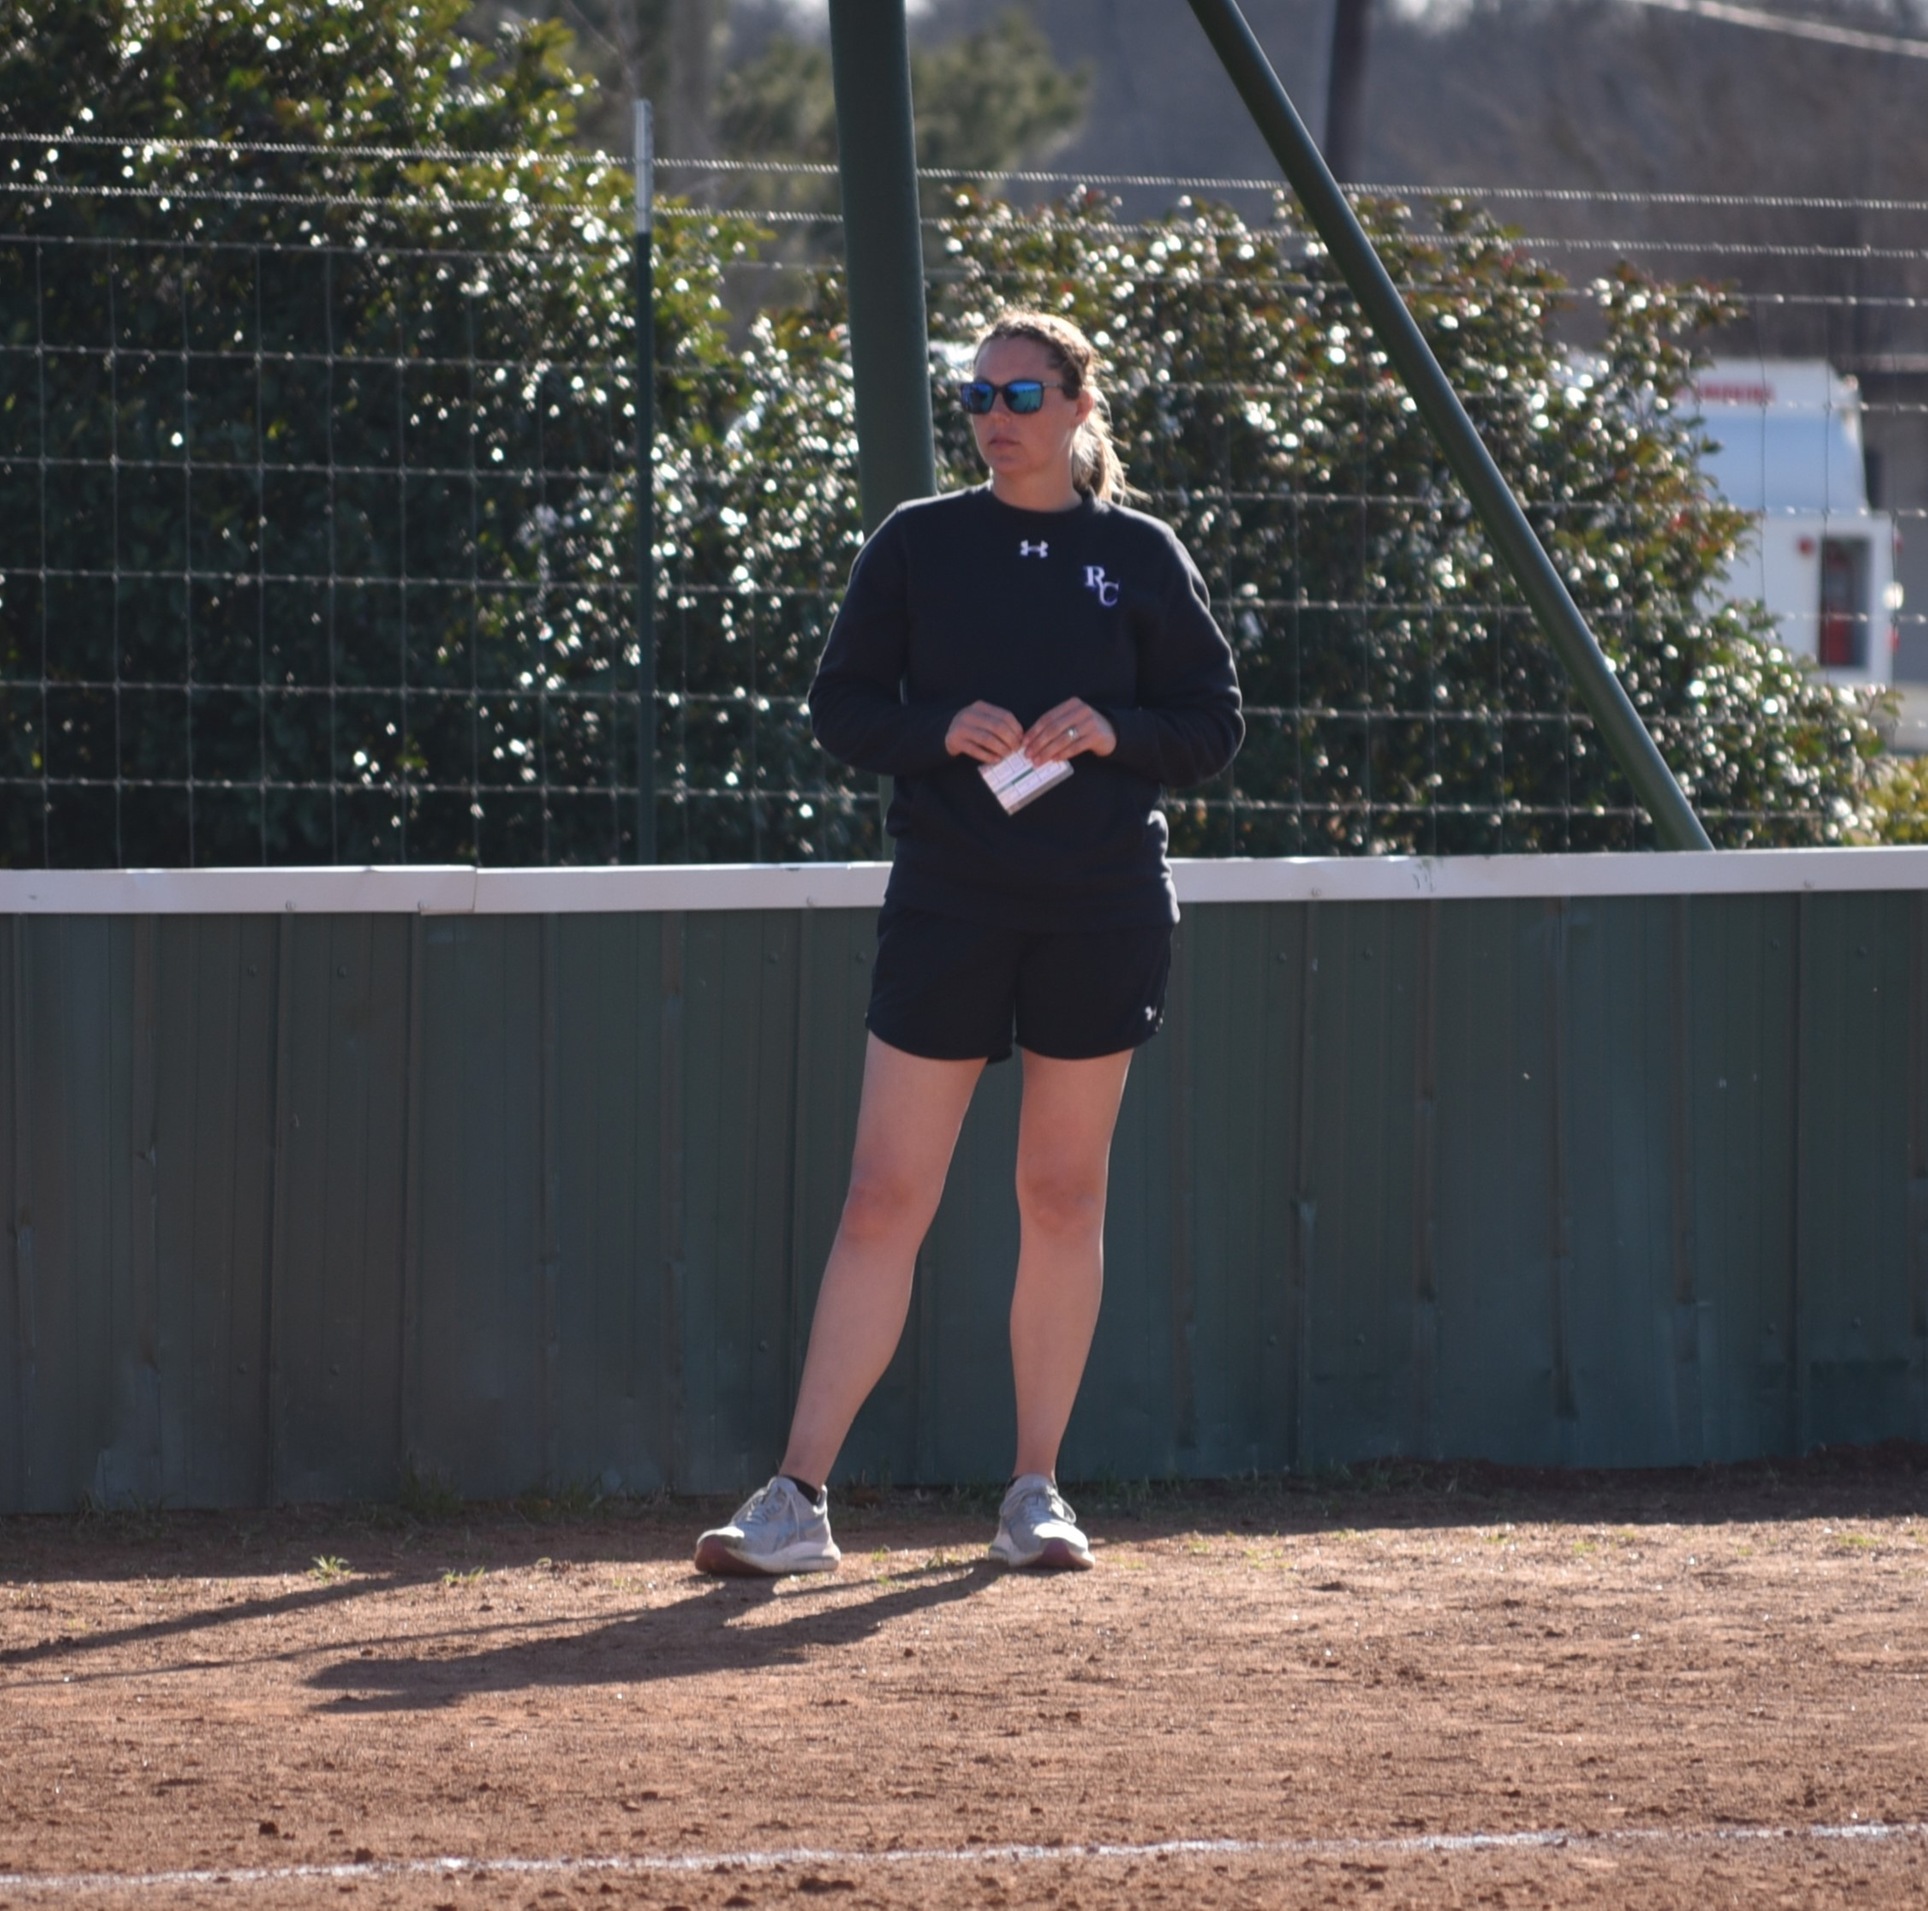 Local coach is breathing life back to the Ranger College Softball program